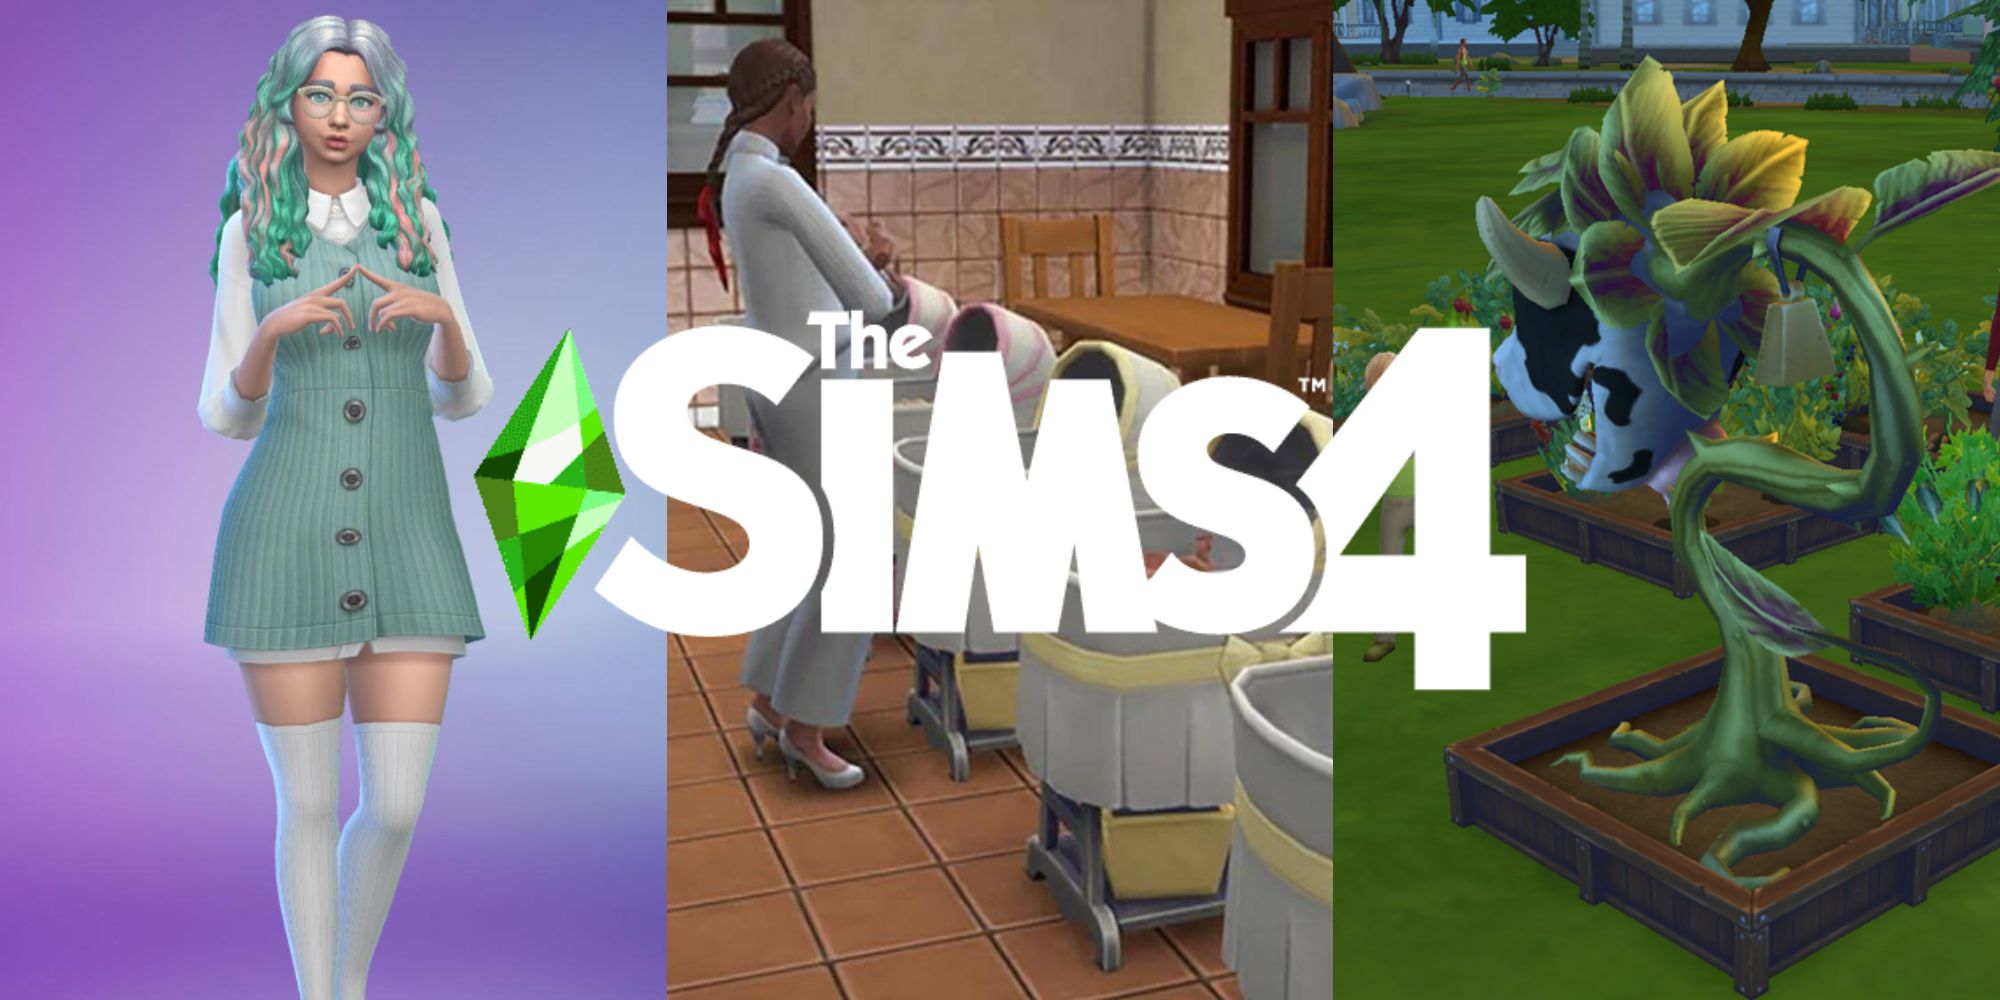 Several sims represent the best legacy challenges in The Sims 4